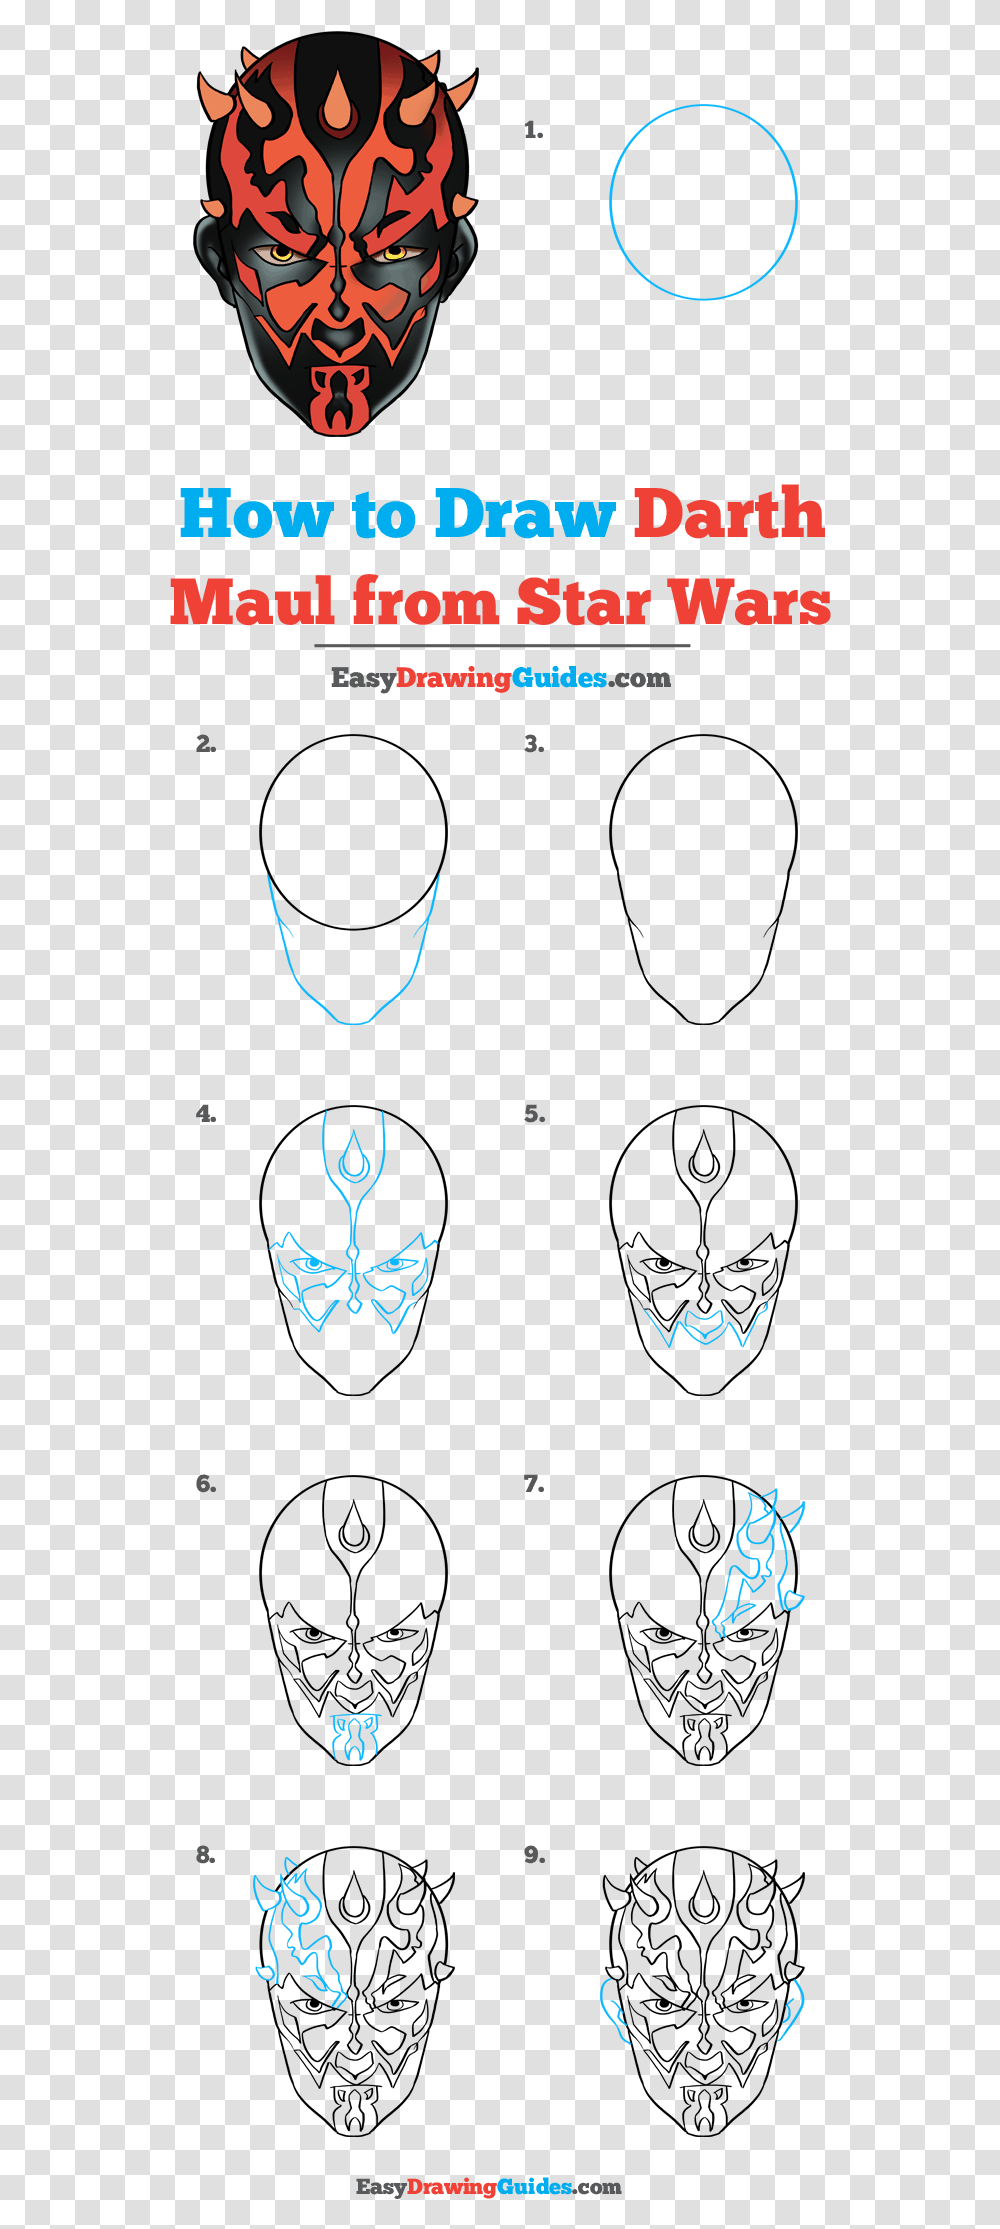 How To Draw Darth Maul From Star Wars Anime Girl Step By Step Drawing, Poster, Emblem Transparent Png